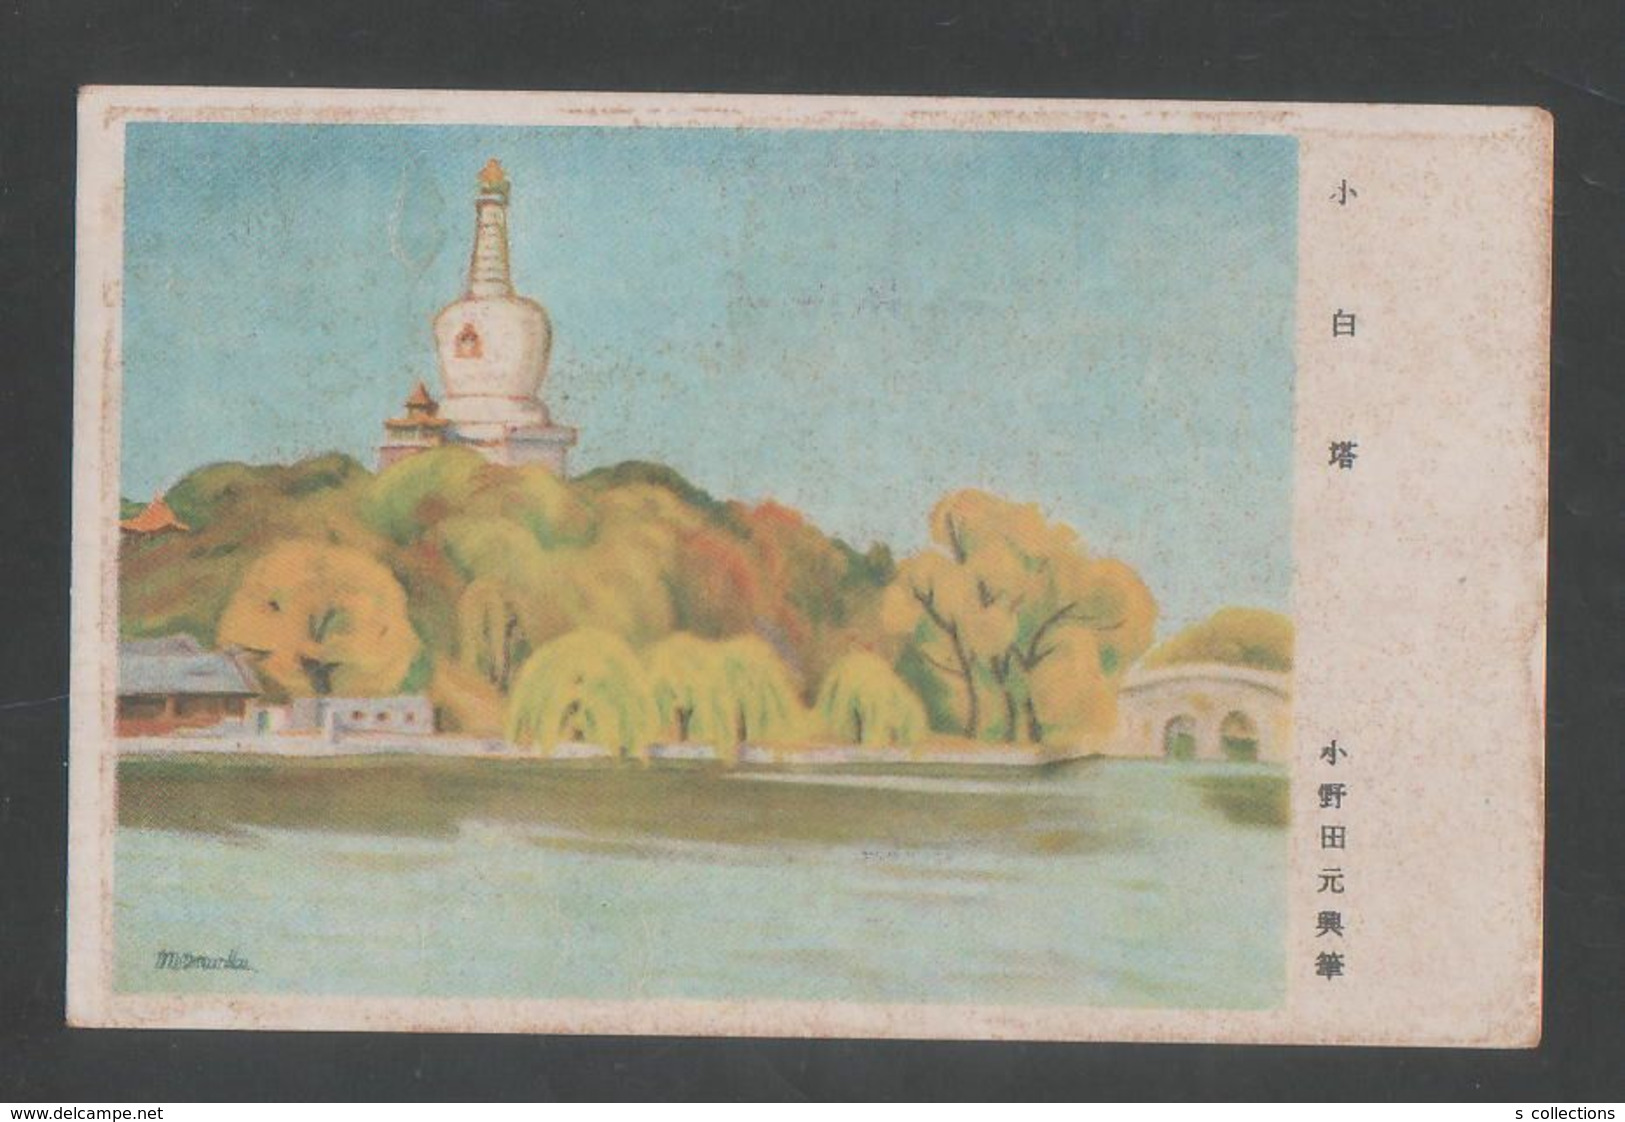 JAPAN WWII Military Small White Tower Picture Postcard North China WW2 MANCHURIA CHINE MANDCHOUKOUO JAPON GIAPPONE - 1941-45 Chine Du Nord